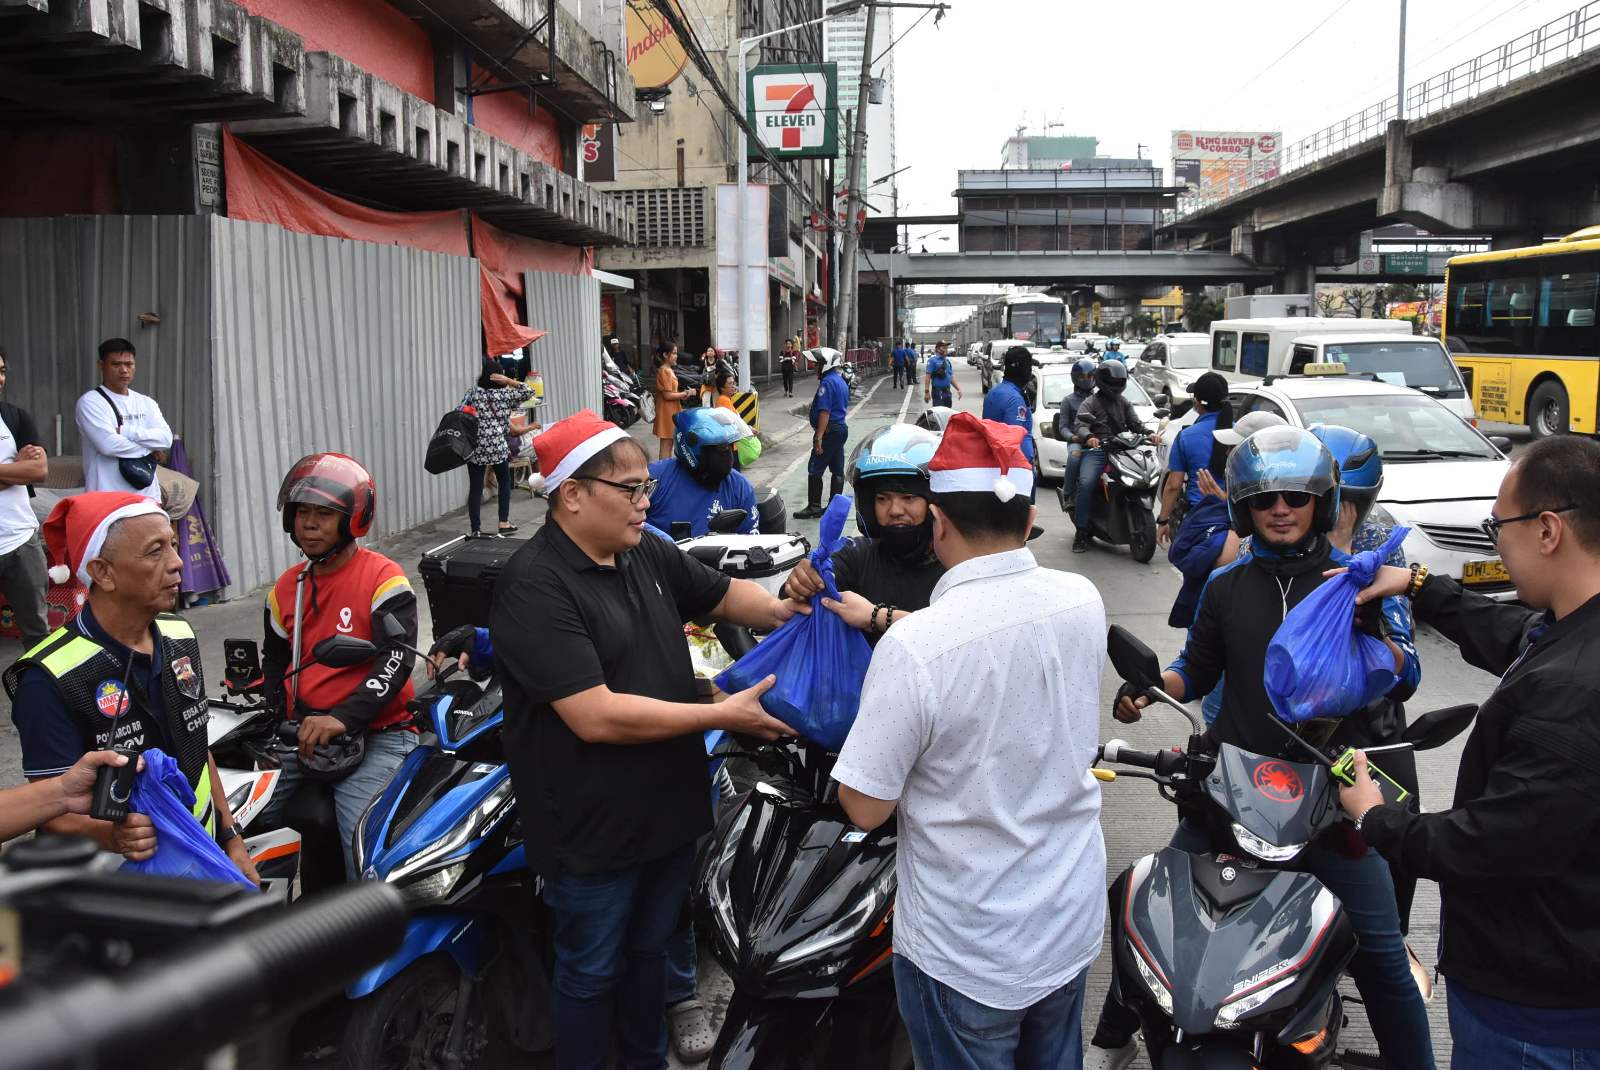 Embracing the Christmas spirit, the Metropolitan Manila Development Authority (MMDA) handed out grocery packs to motorists in the middle of Edsa on Tuesday.